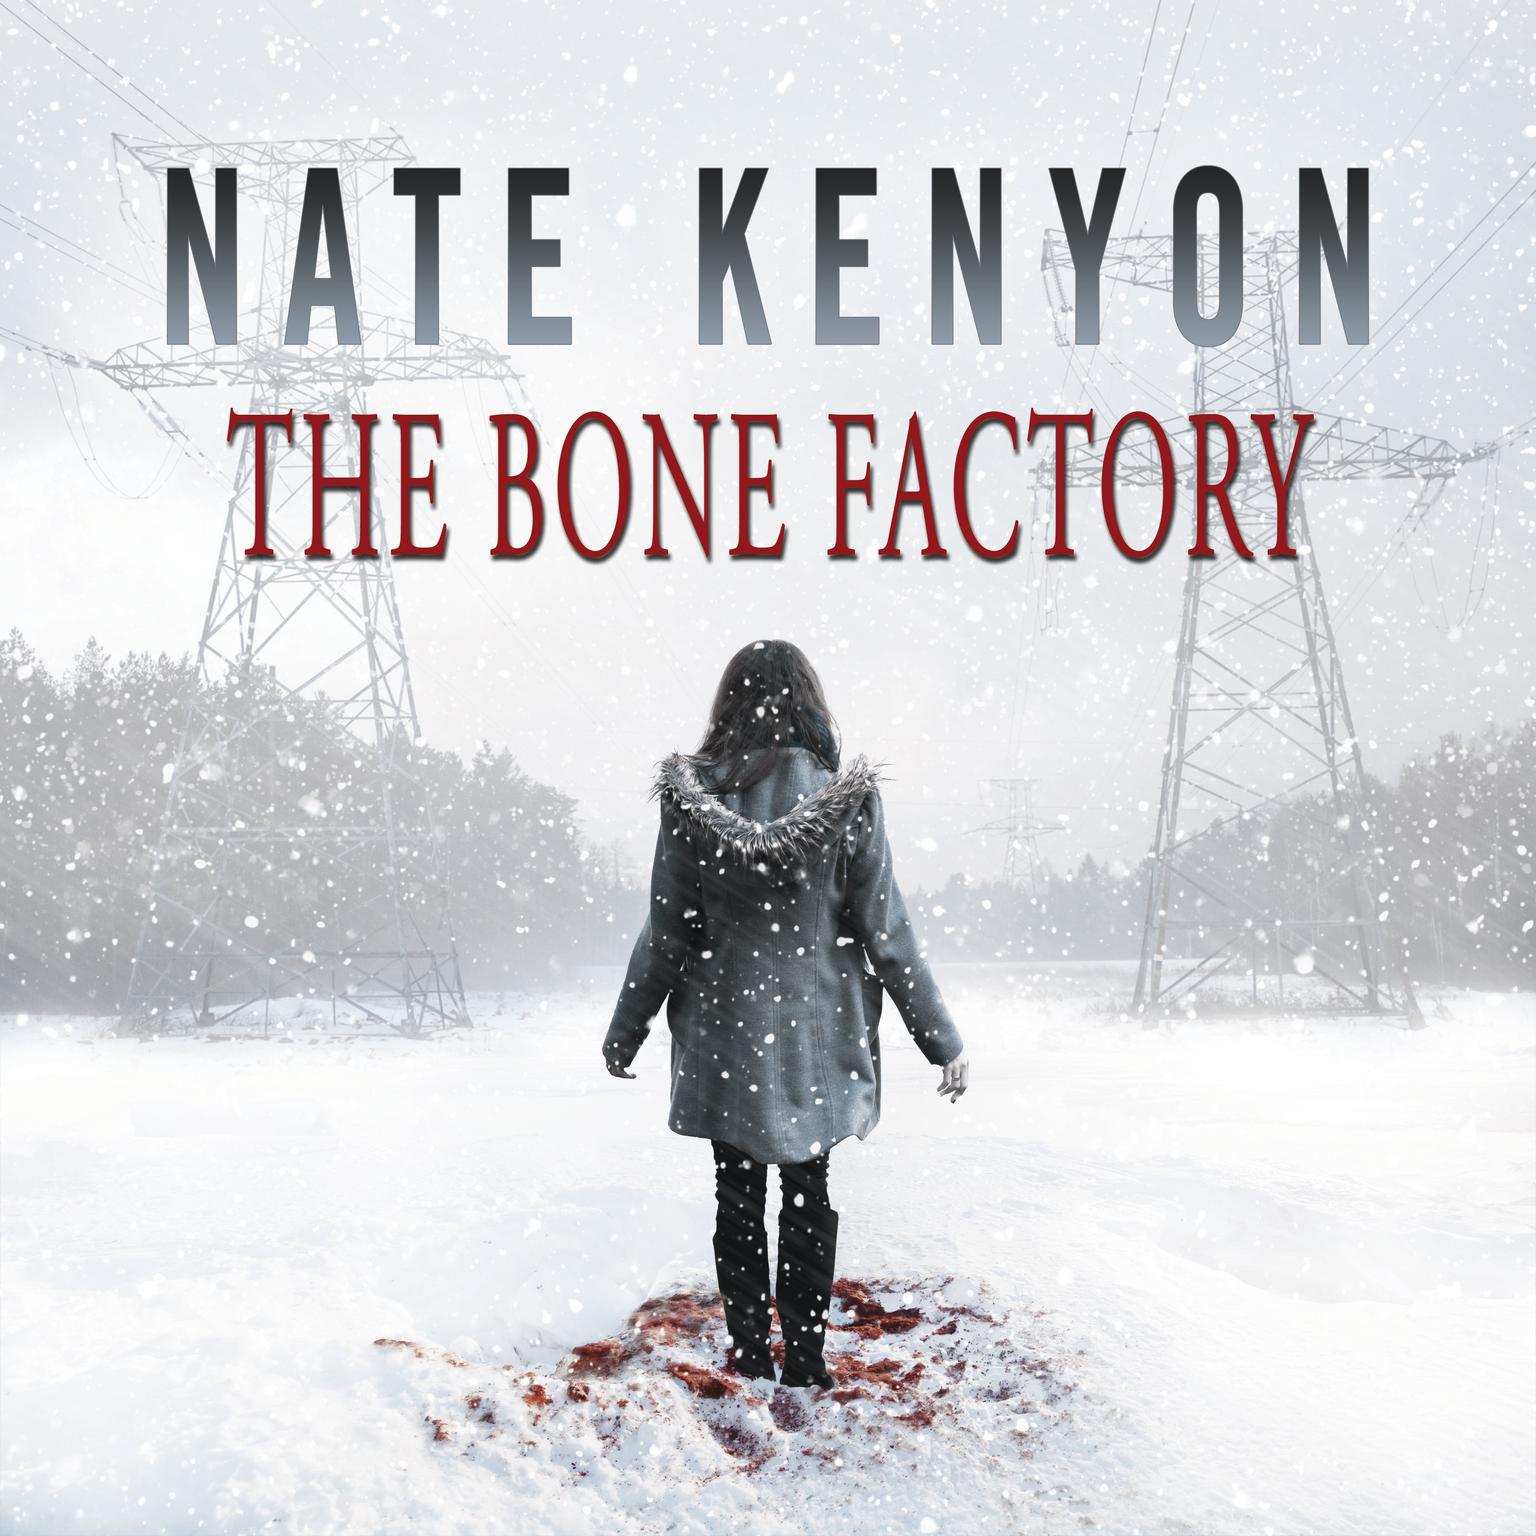 The Bone Factory Audiobook, by Nate Kenyon